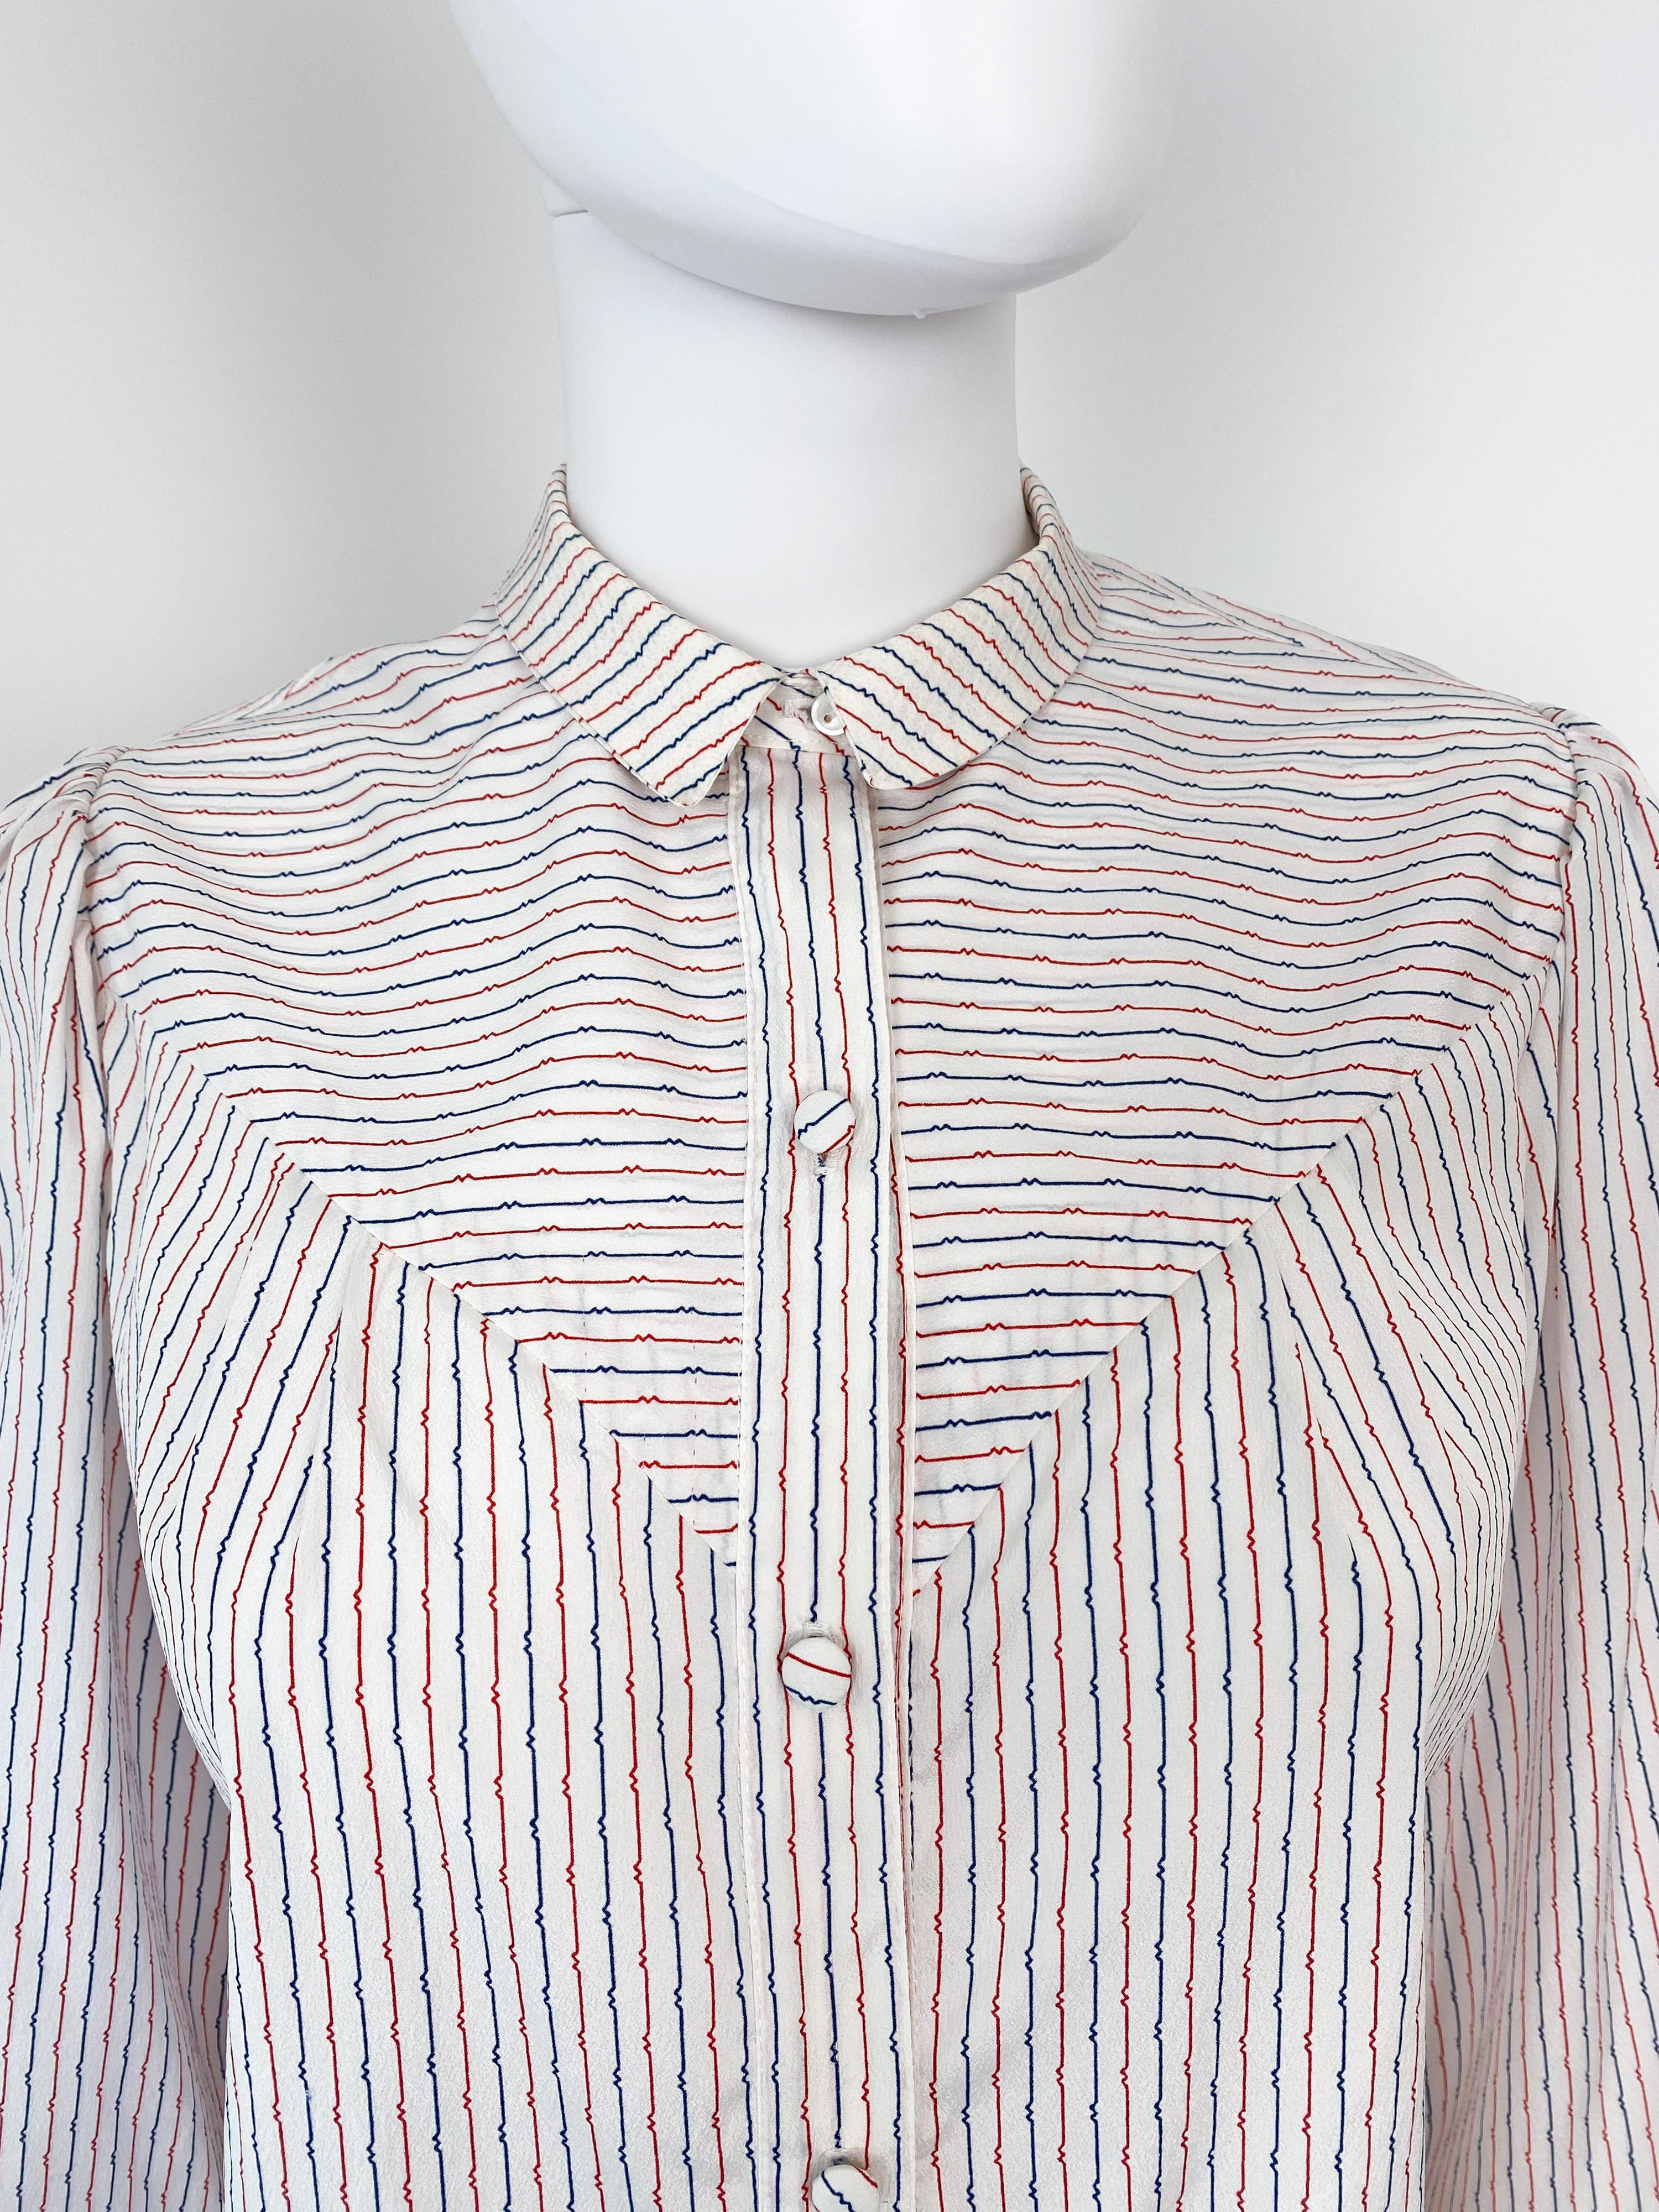 Women's Vintage 1980s Silky Polyester Western Blouse Top Red and Blue Stripes Size 10/12 For Sale